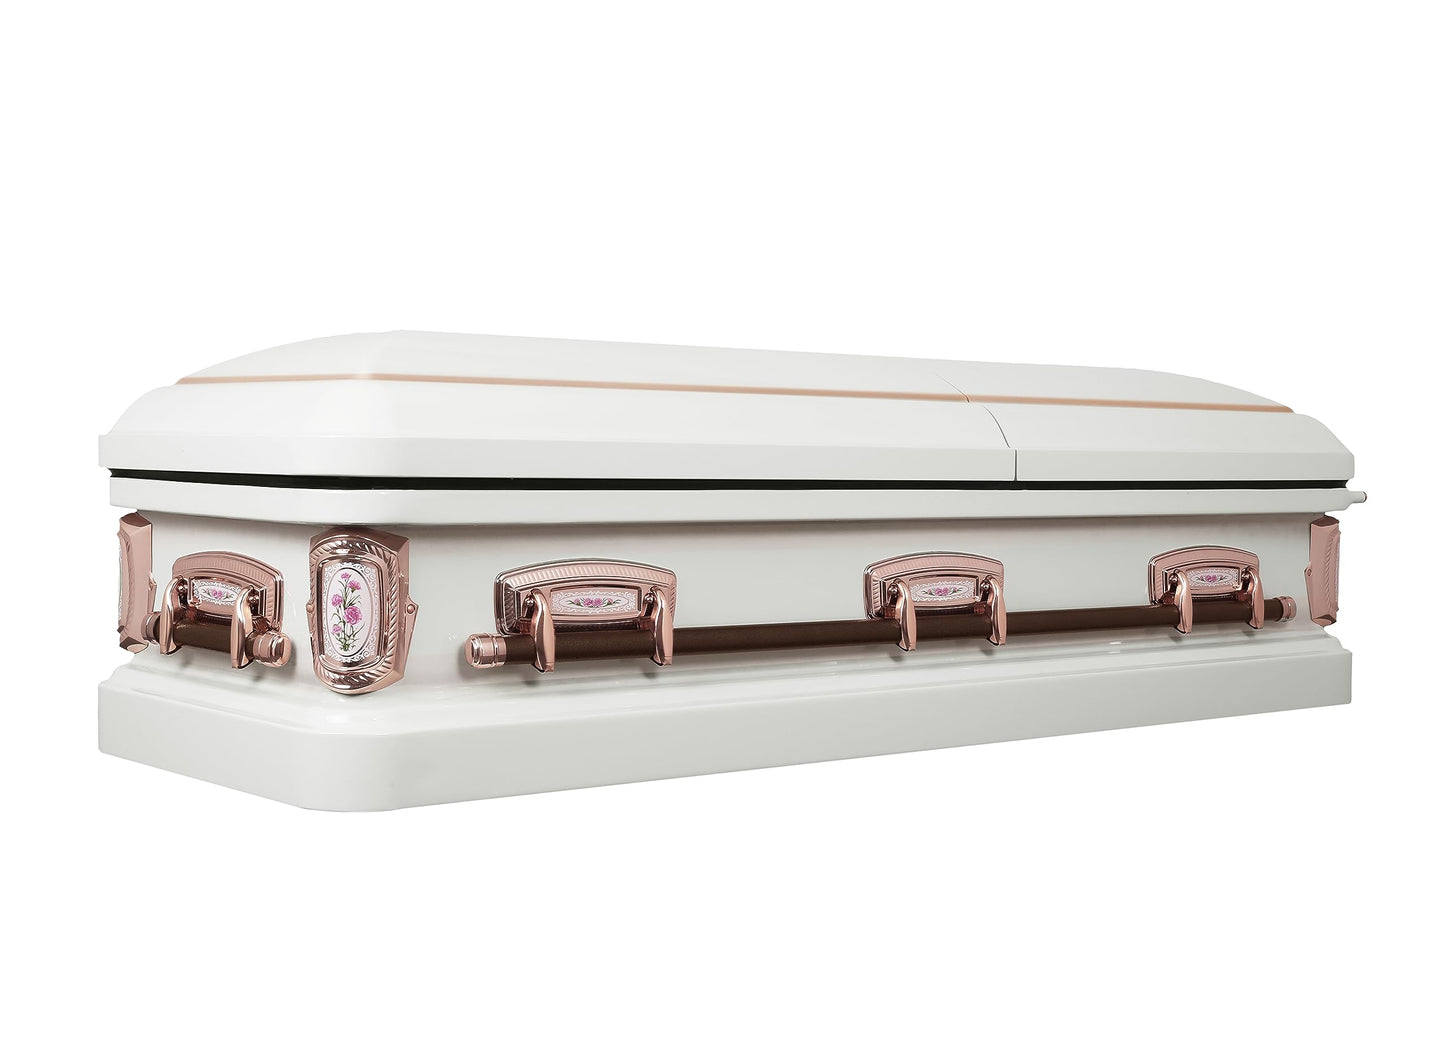 Overnight Caskets Primrose Metal Funeral Casket - Premium 18-Gauge Steel - Fully Appointed Adult Casket - Coffin Featuring Antique-White Velvet Interior Lining and Coordinating Pillow & Throw Set